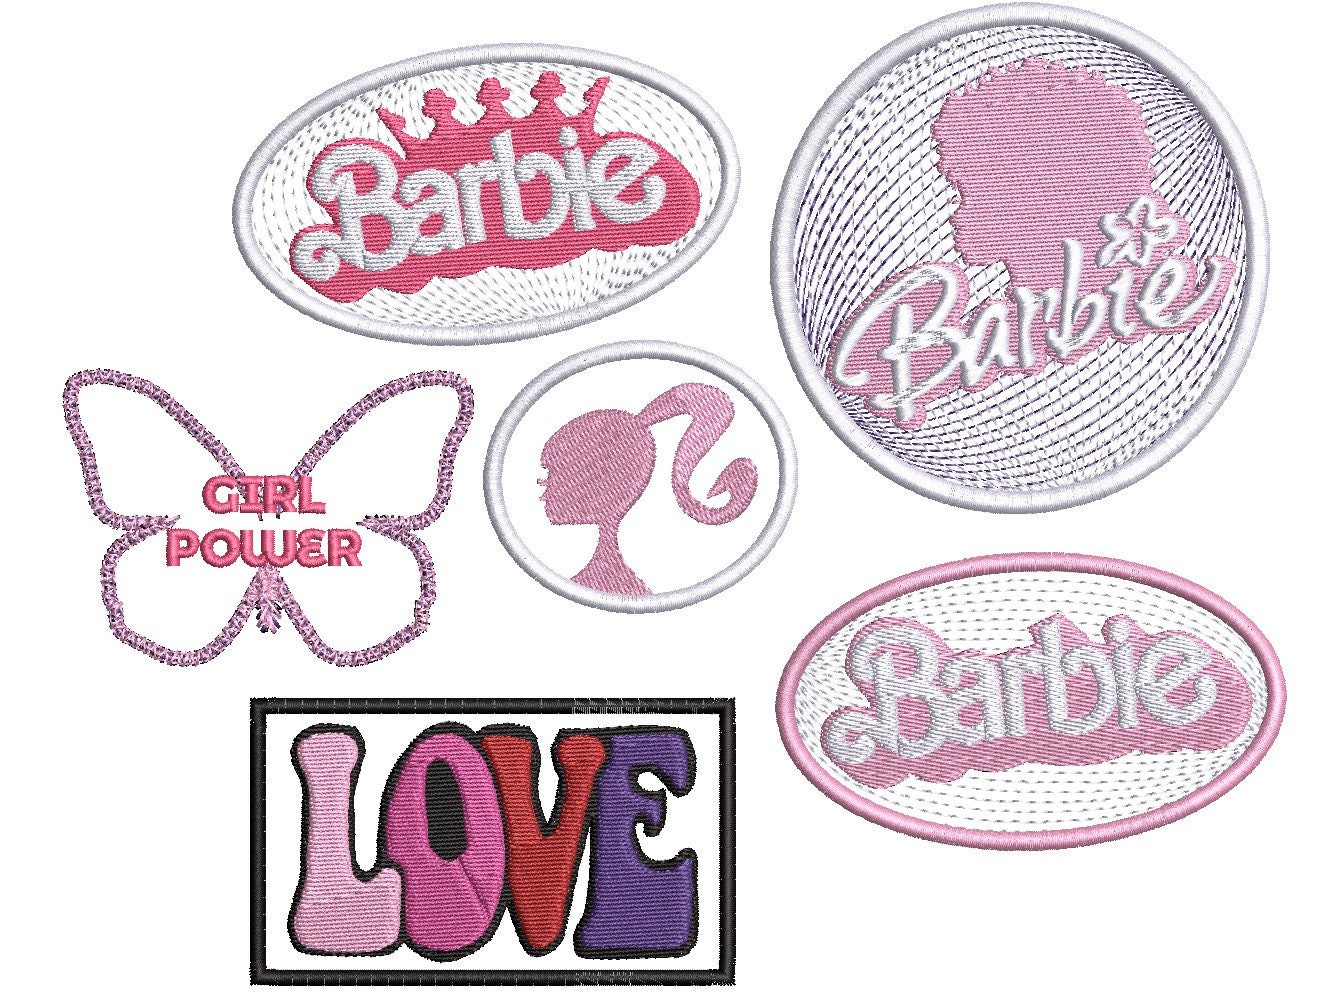 Barbie Iron on Patches - 7 Pack